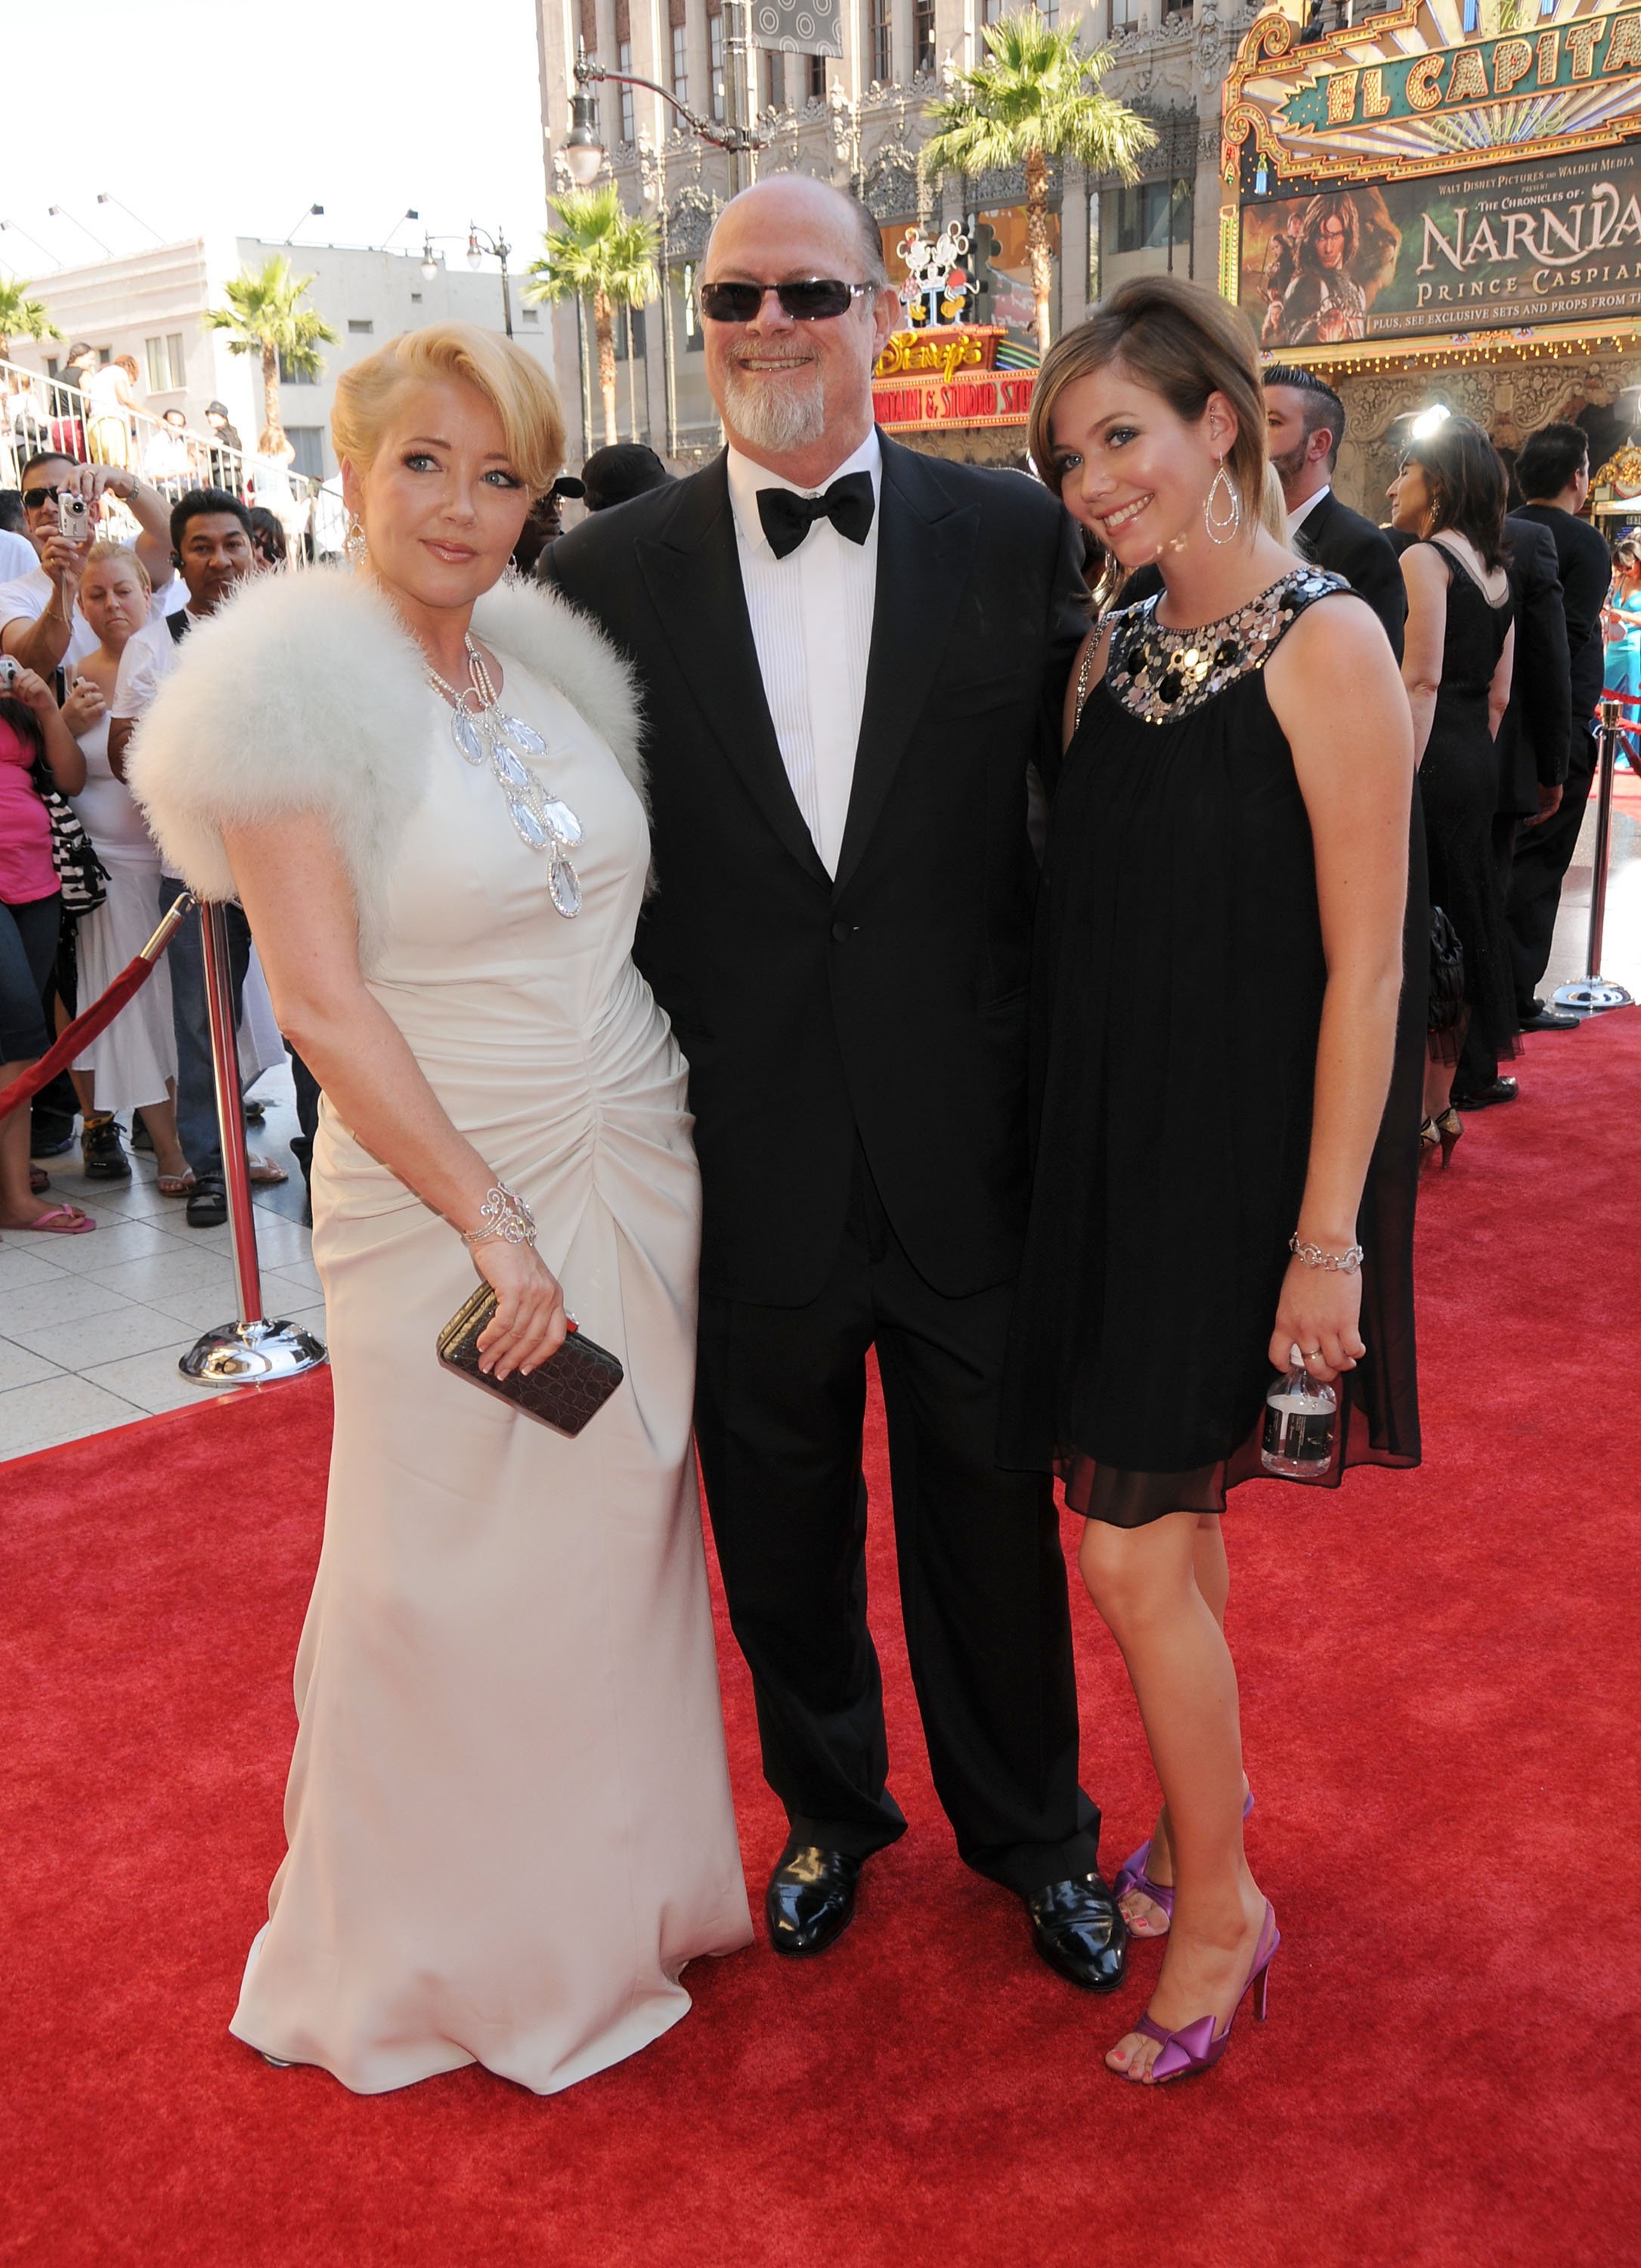 Melody Thomas Scott, Edward Scott, and daughter at The 35th Annual Daytime Emmy Awards on June 20, 2008, in Los Angeles, California. | Source: Gregg DeGuire/WireImage/Getty Images